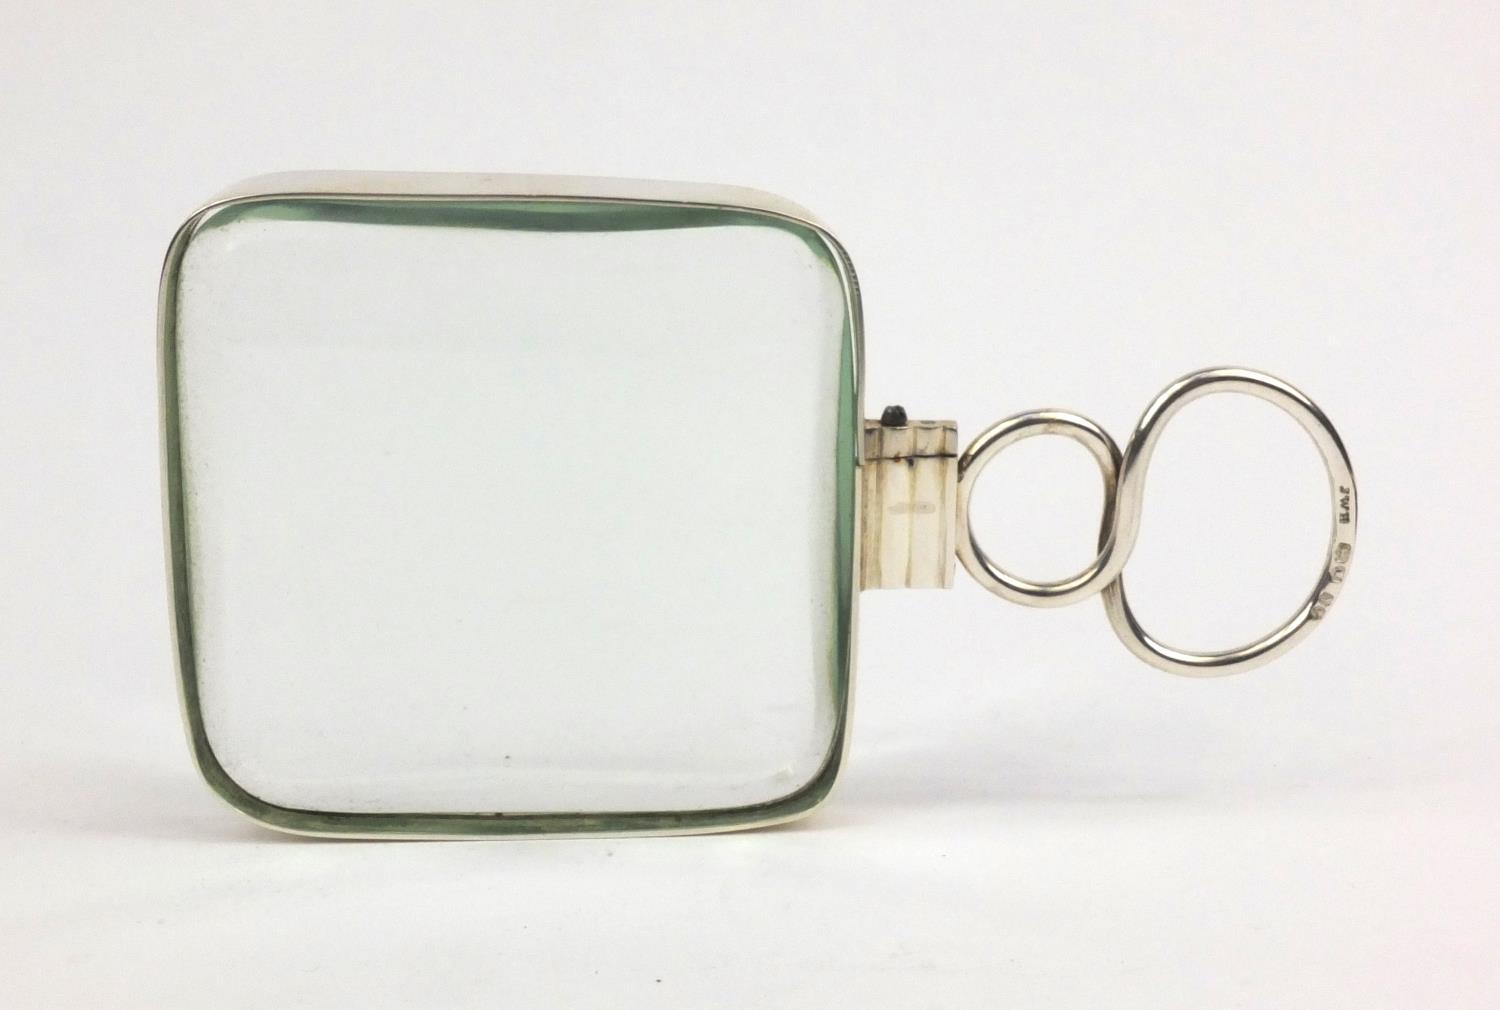 Square Victorian silver magnifying glass with original case, JWH London 1858, 13.5cm long - Image 4 of 5